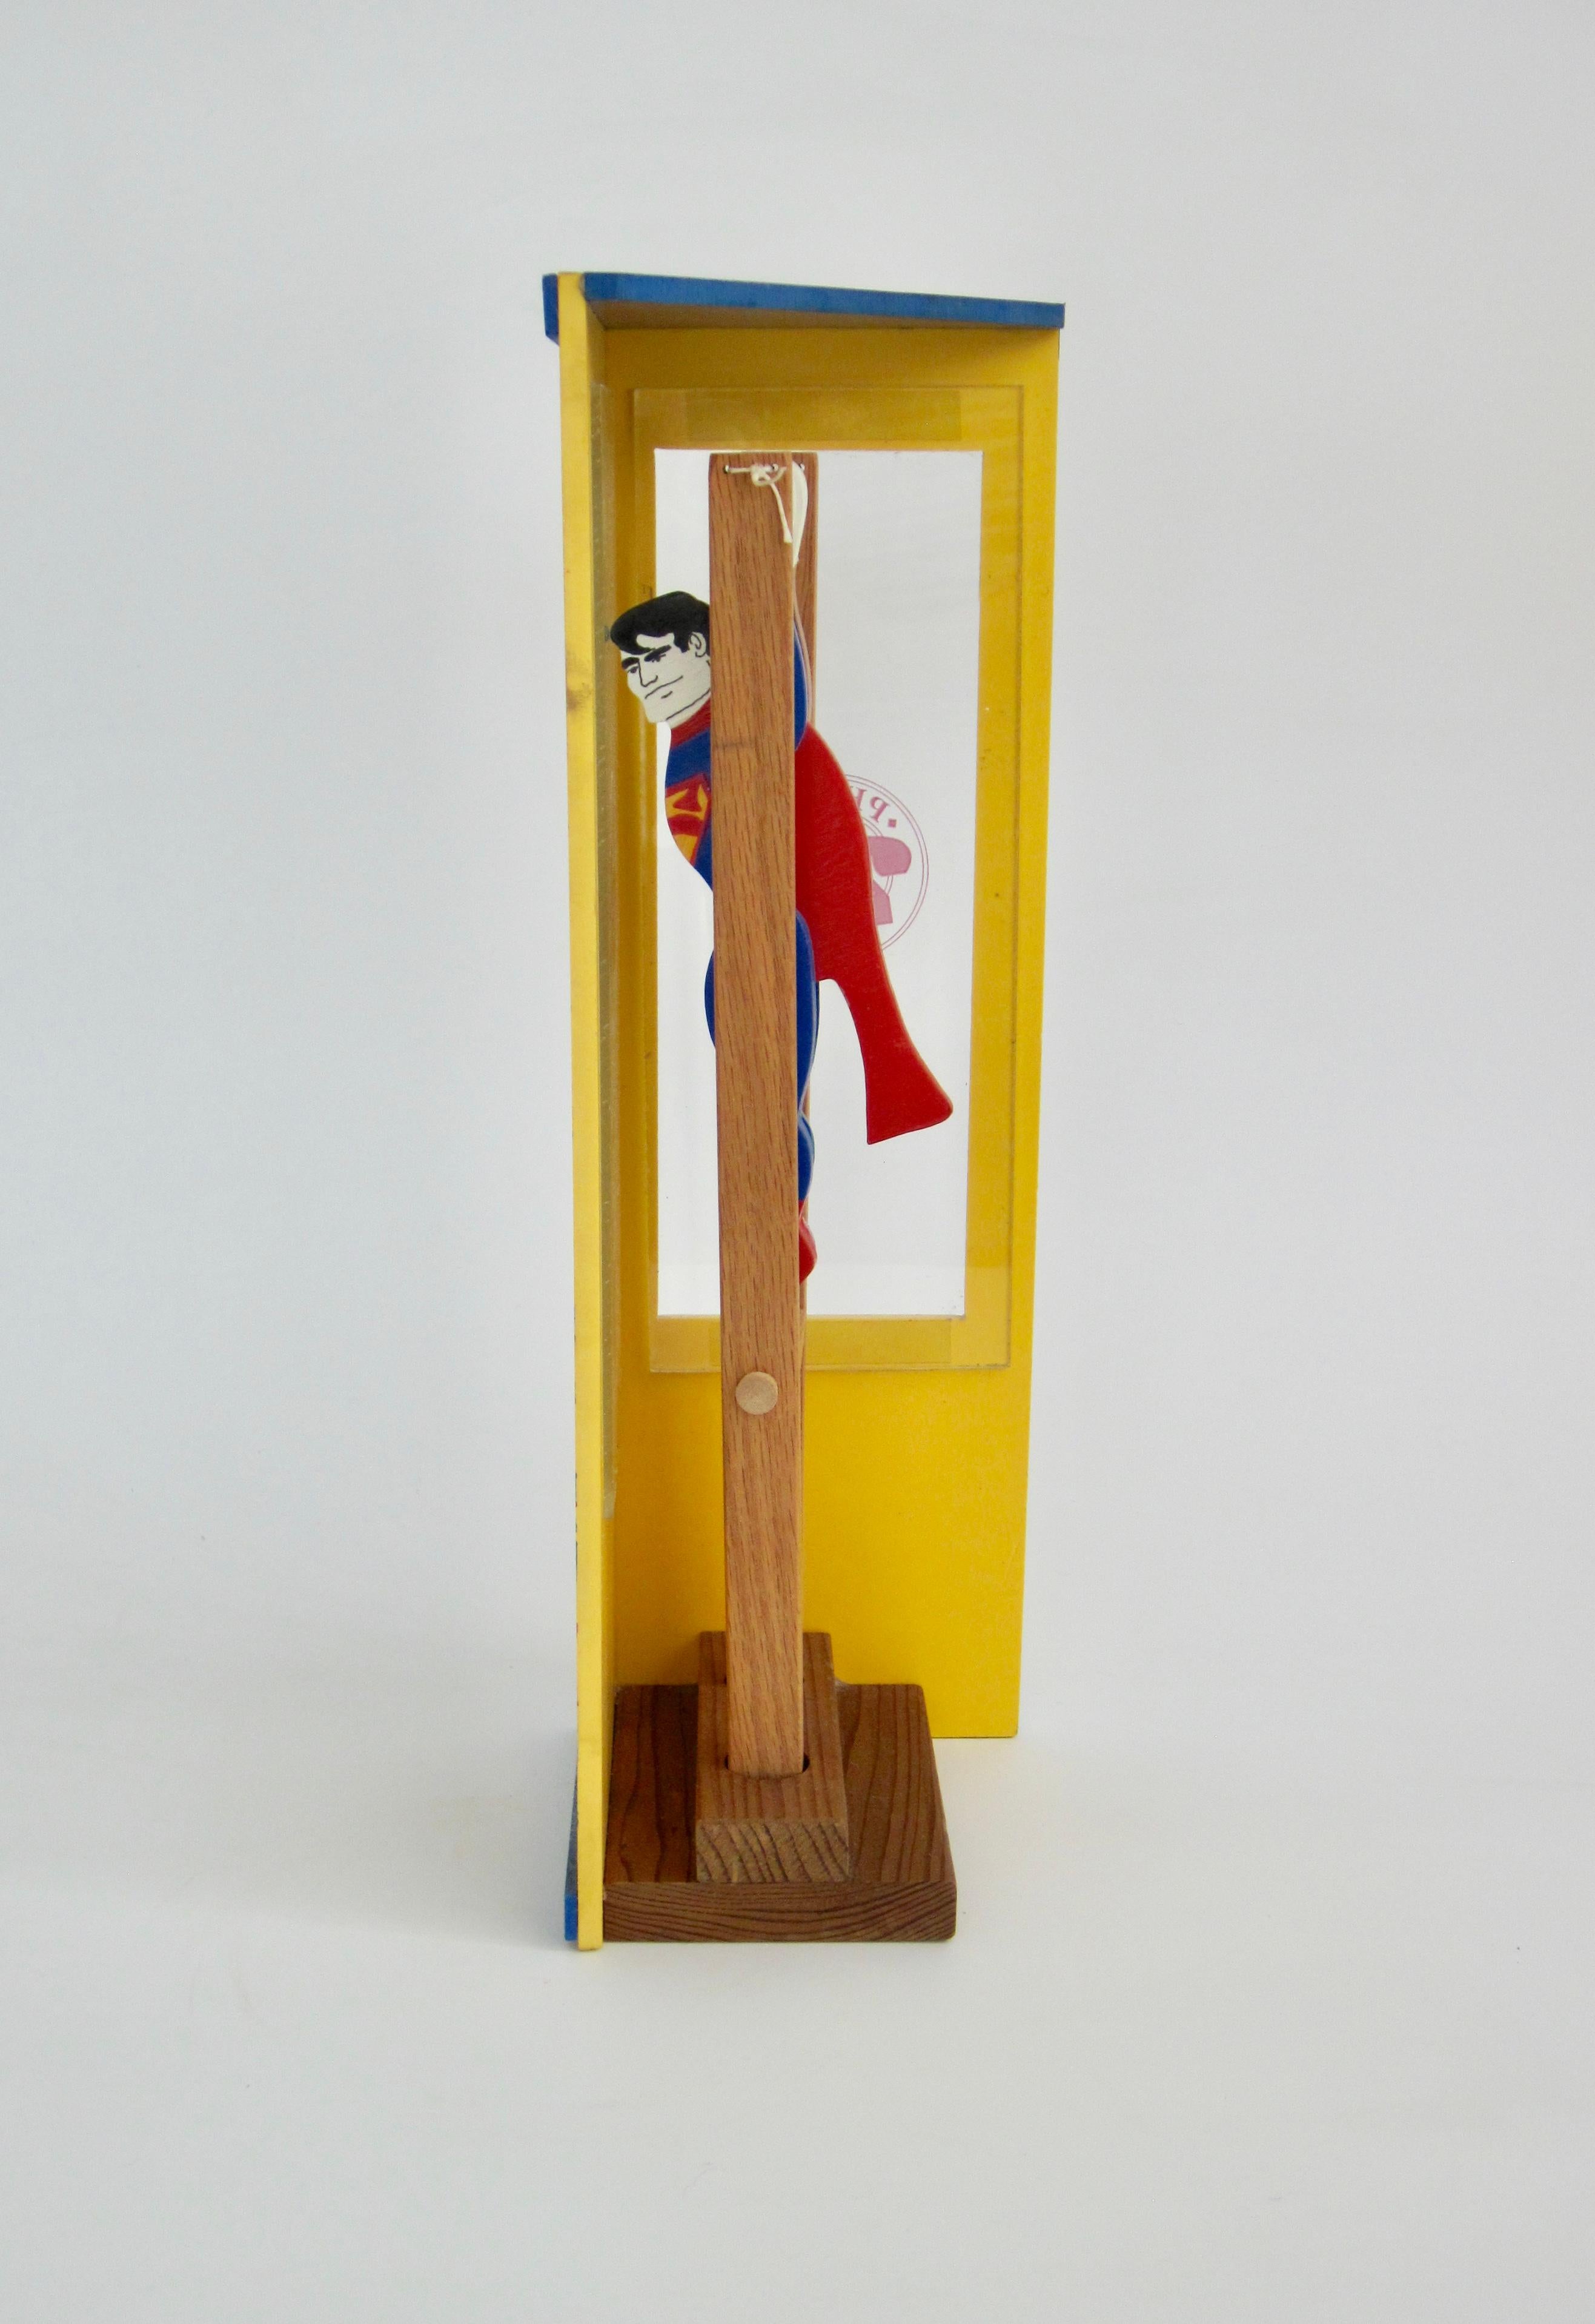 Superman/Clark Kent Wooden Trapeze Artist Toy with Graffiti Phone Booth For Sale 2